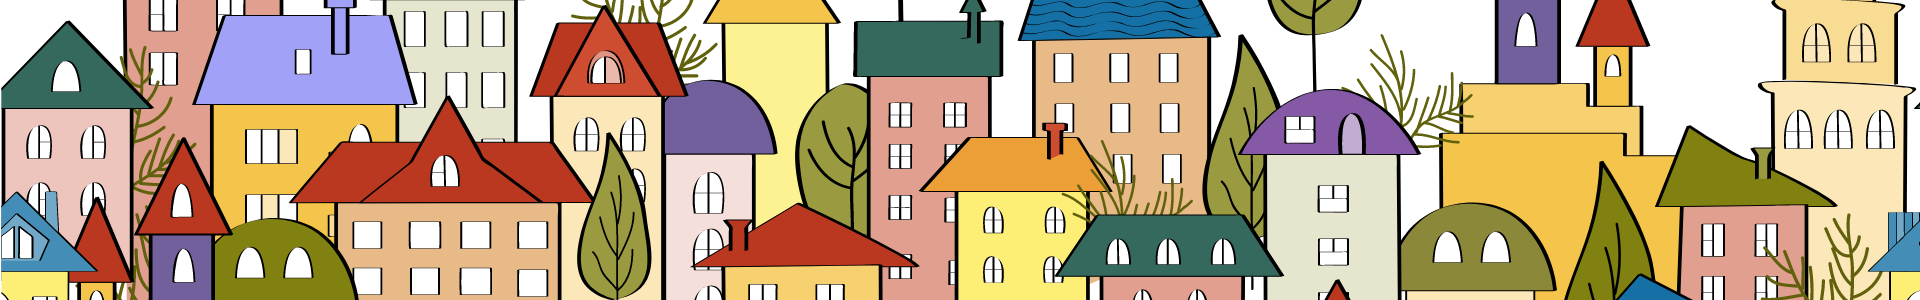 cartoon townhomes in various colors